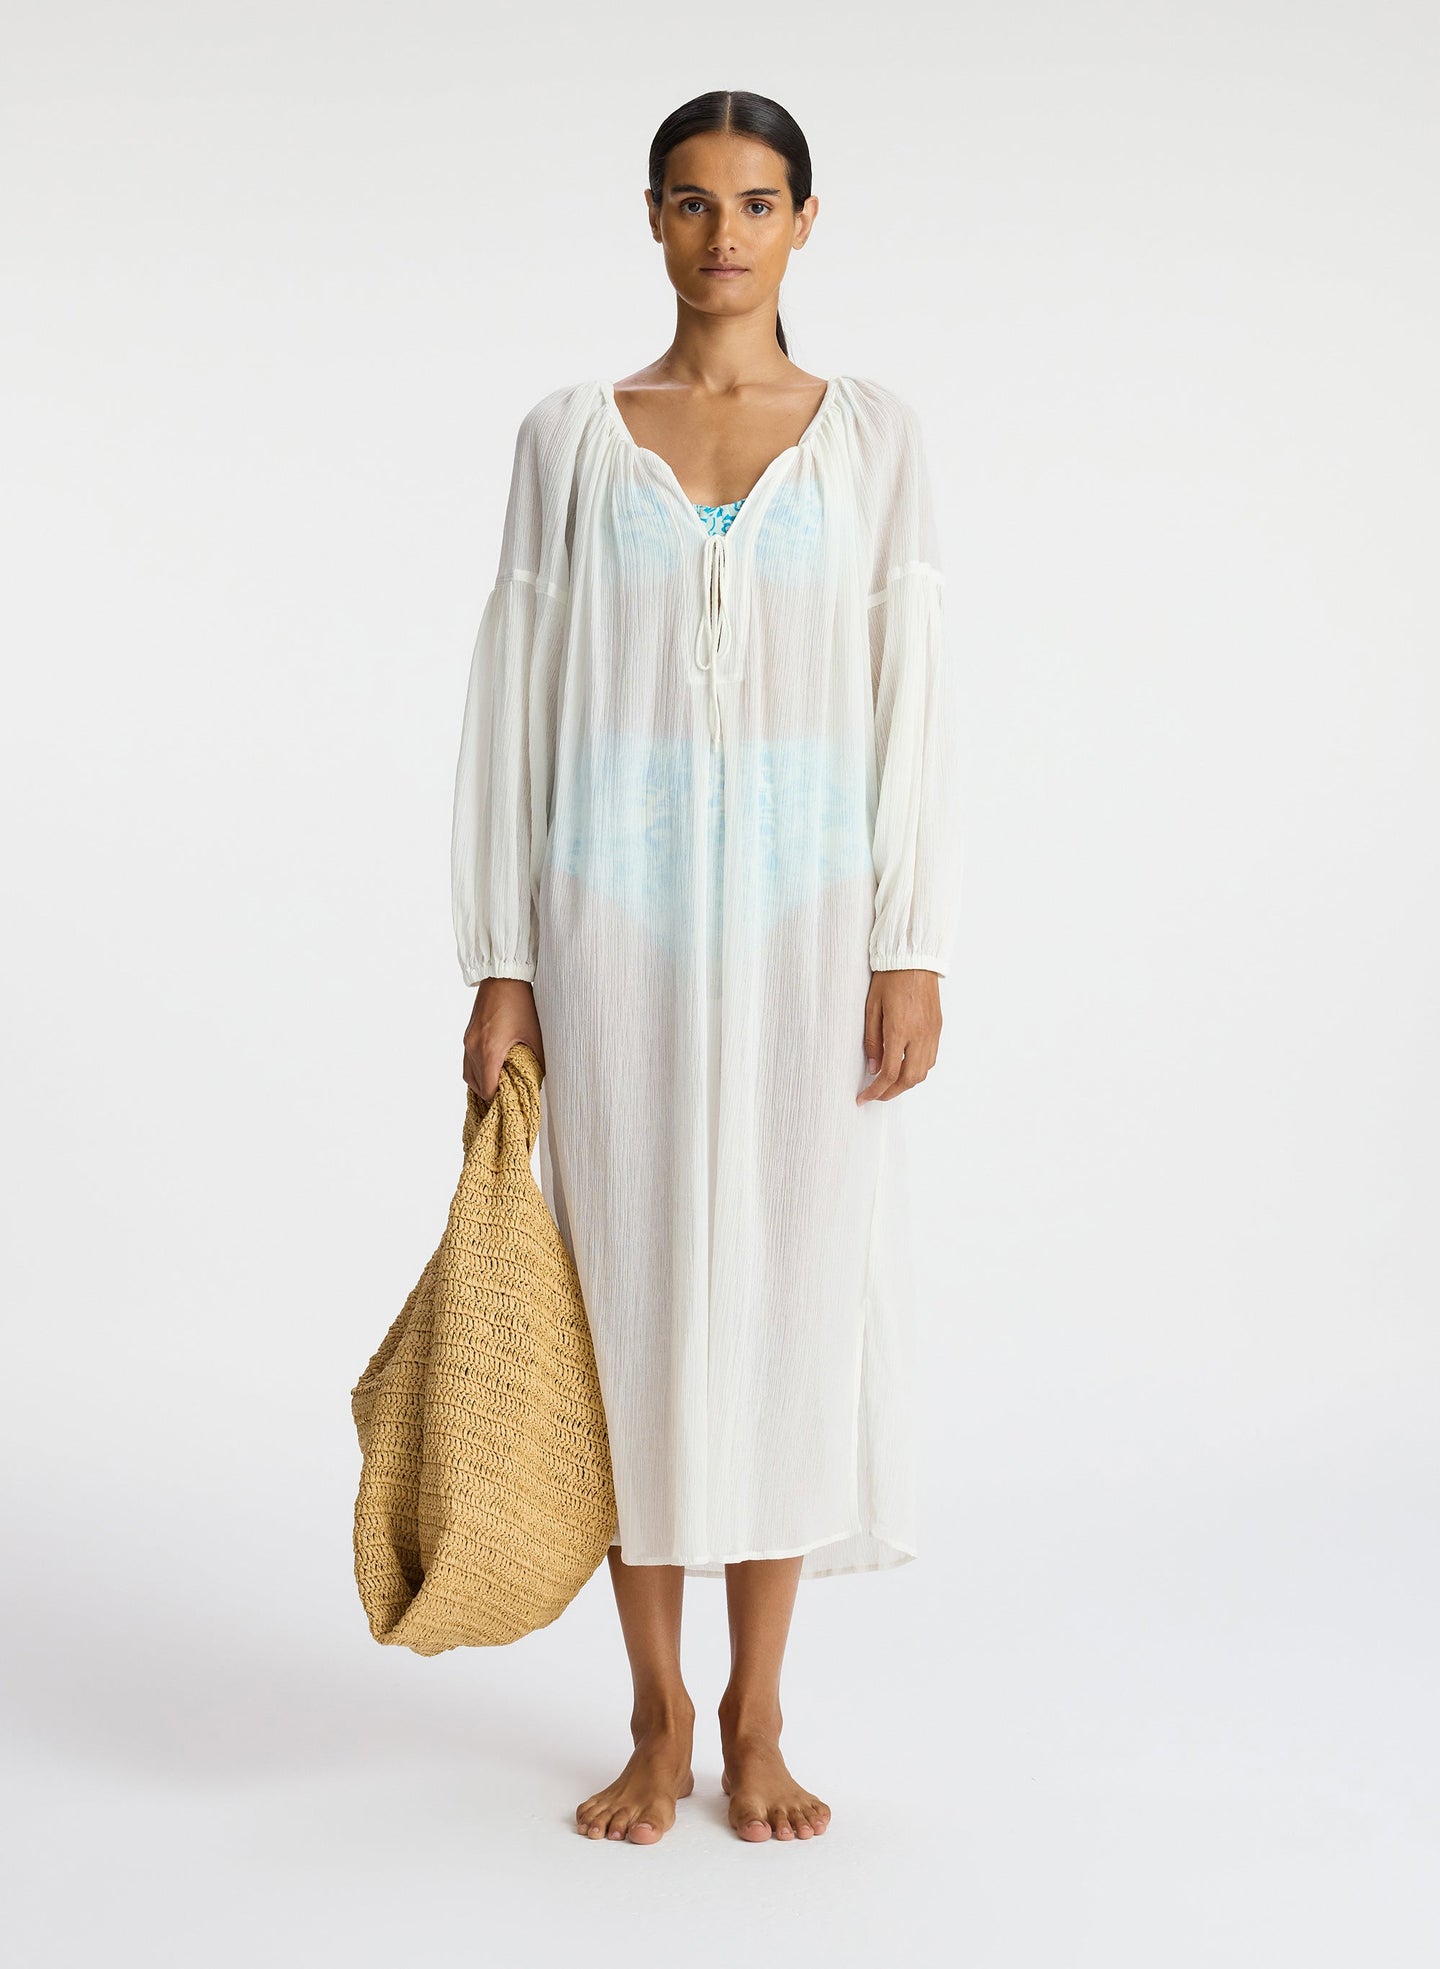 front view of woman wearing white sheer swim cover up dress